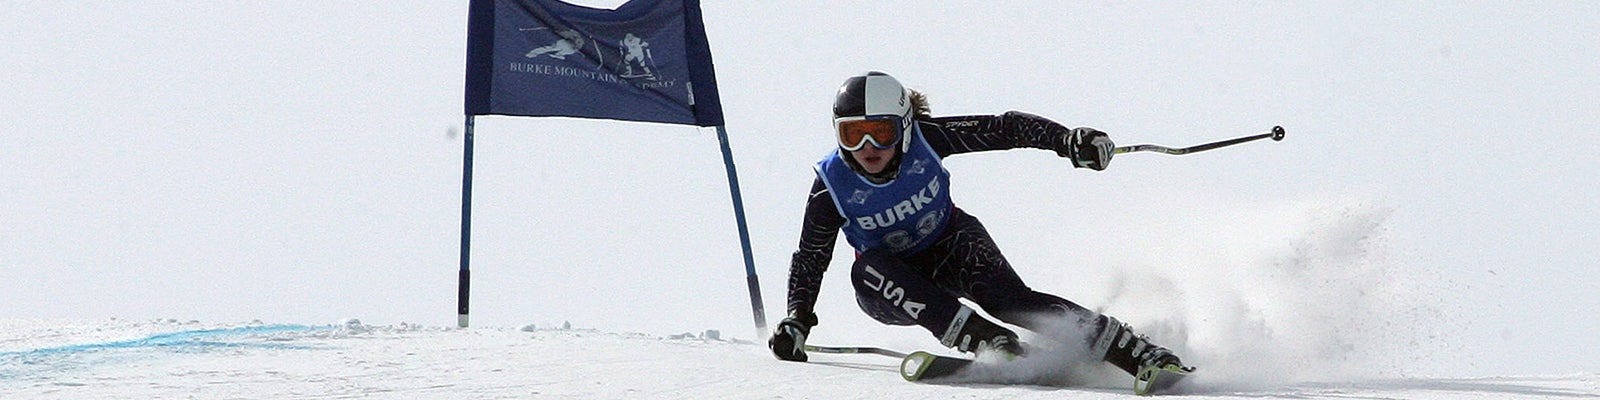 Behind Burke Mountain’s rise to become the top U.S. Olympic ski racing school